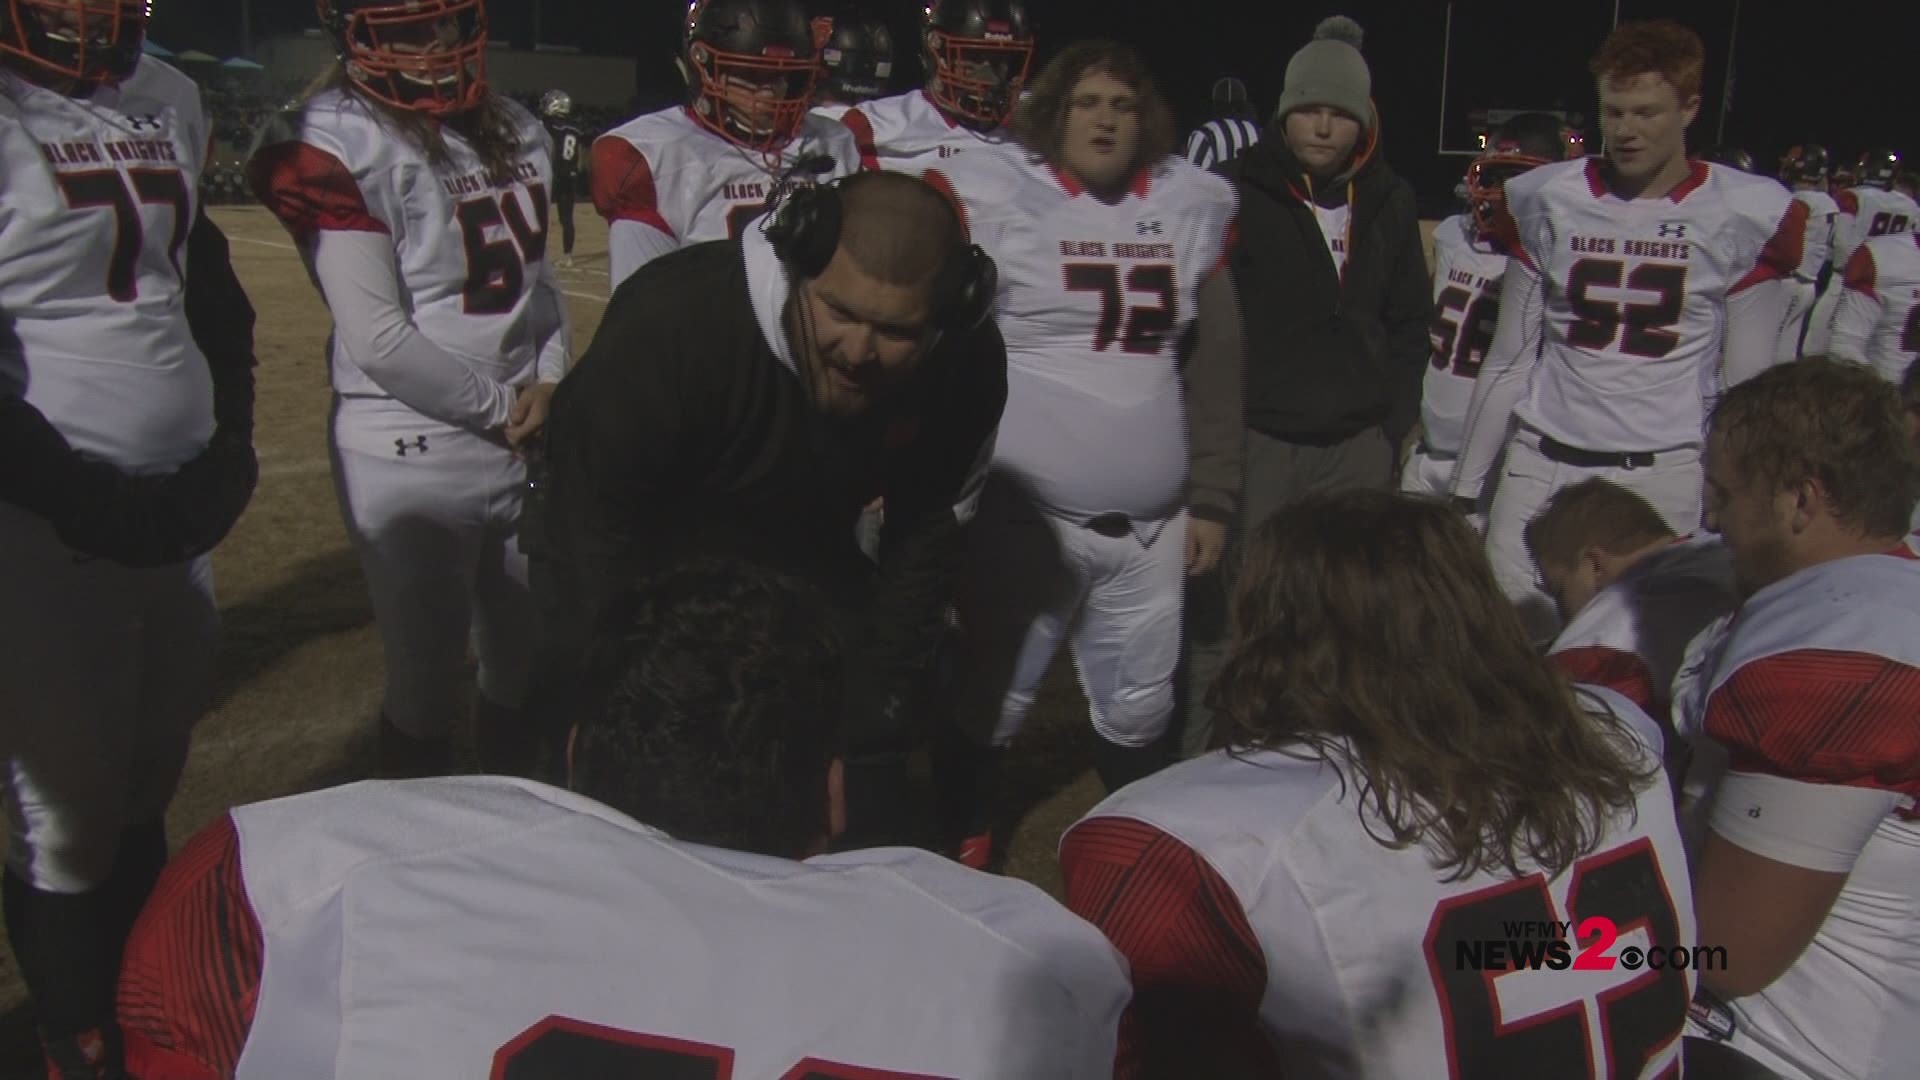 North Davidson defeated rival Ledford 24-7 Friday night to advance to the 2AA state football championship.